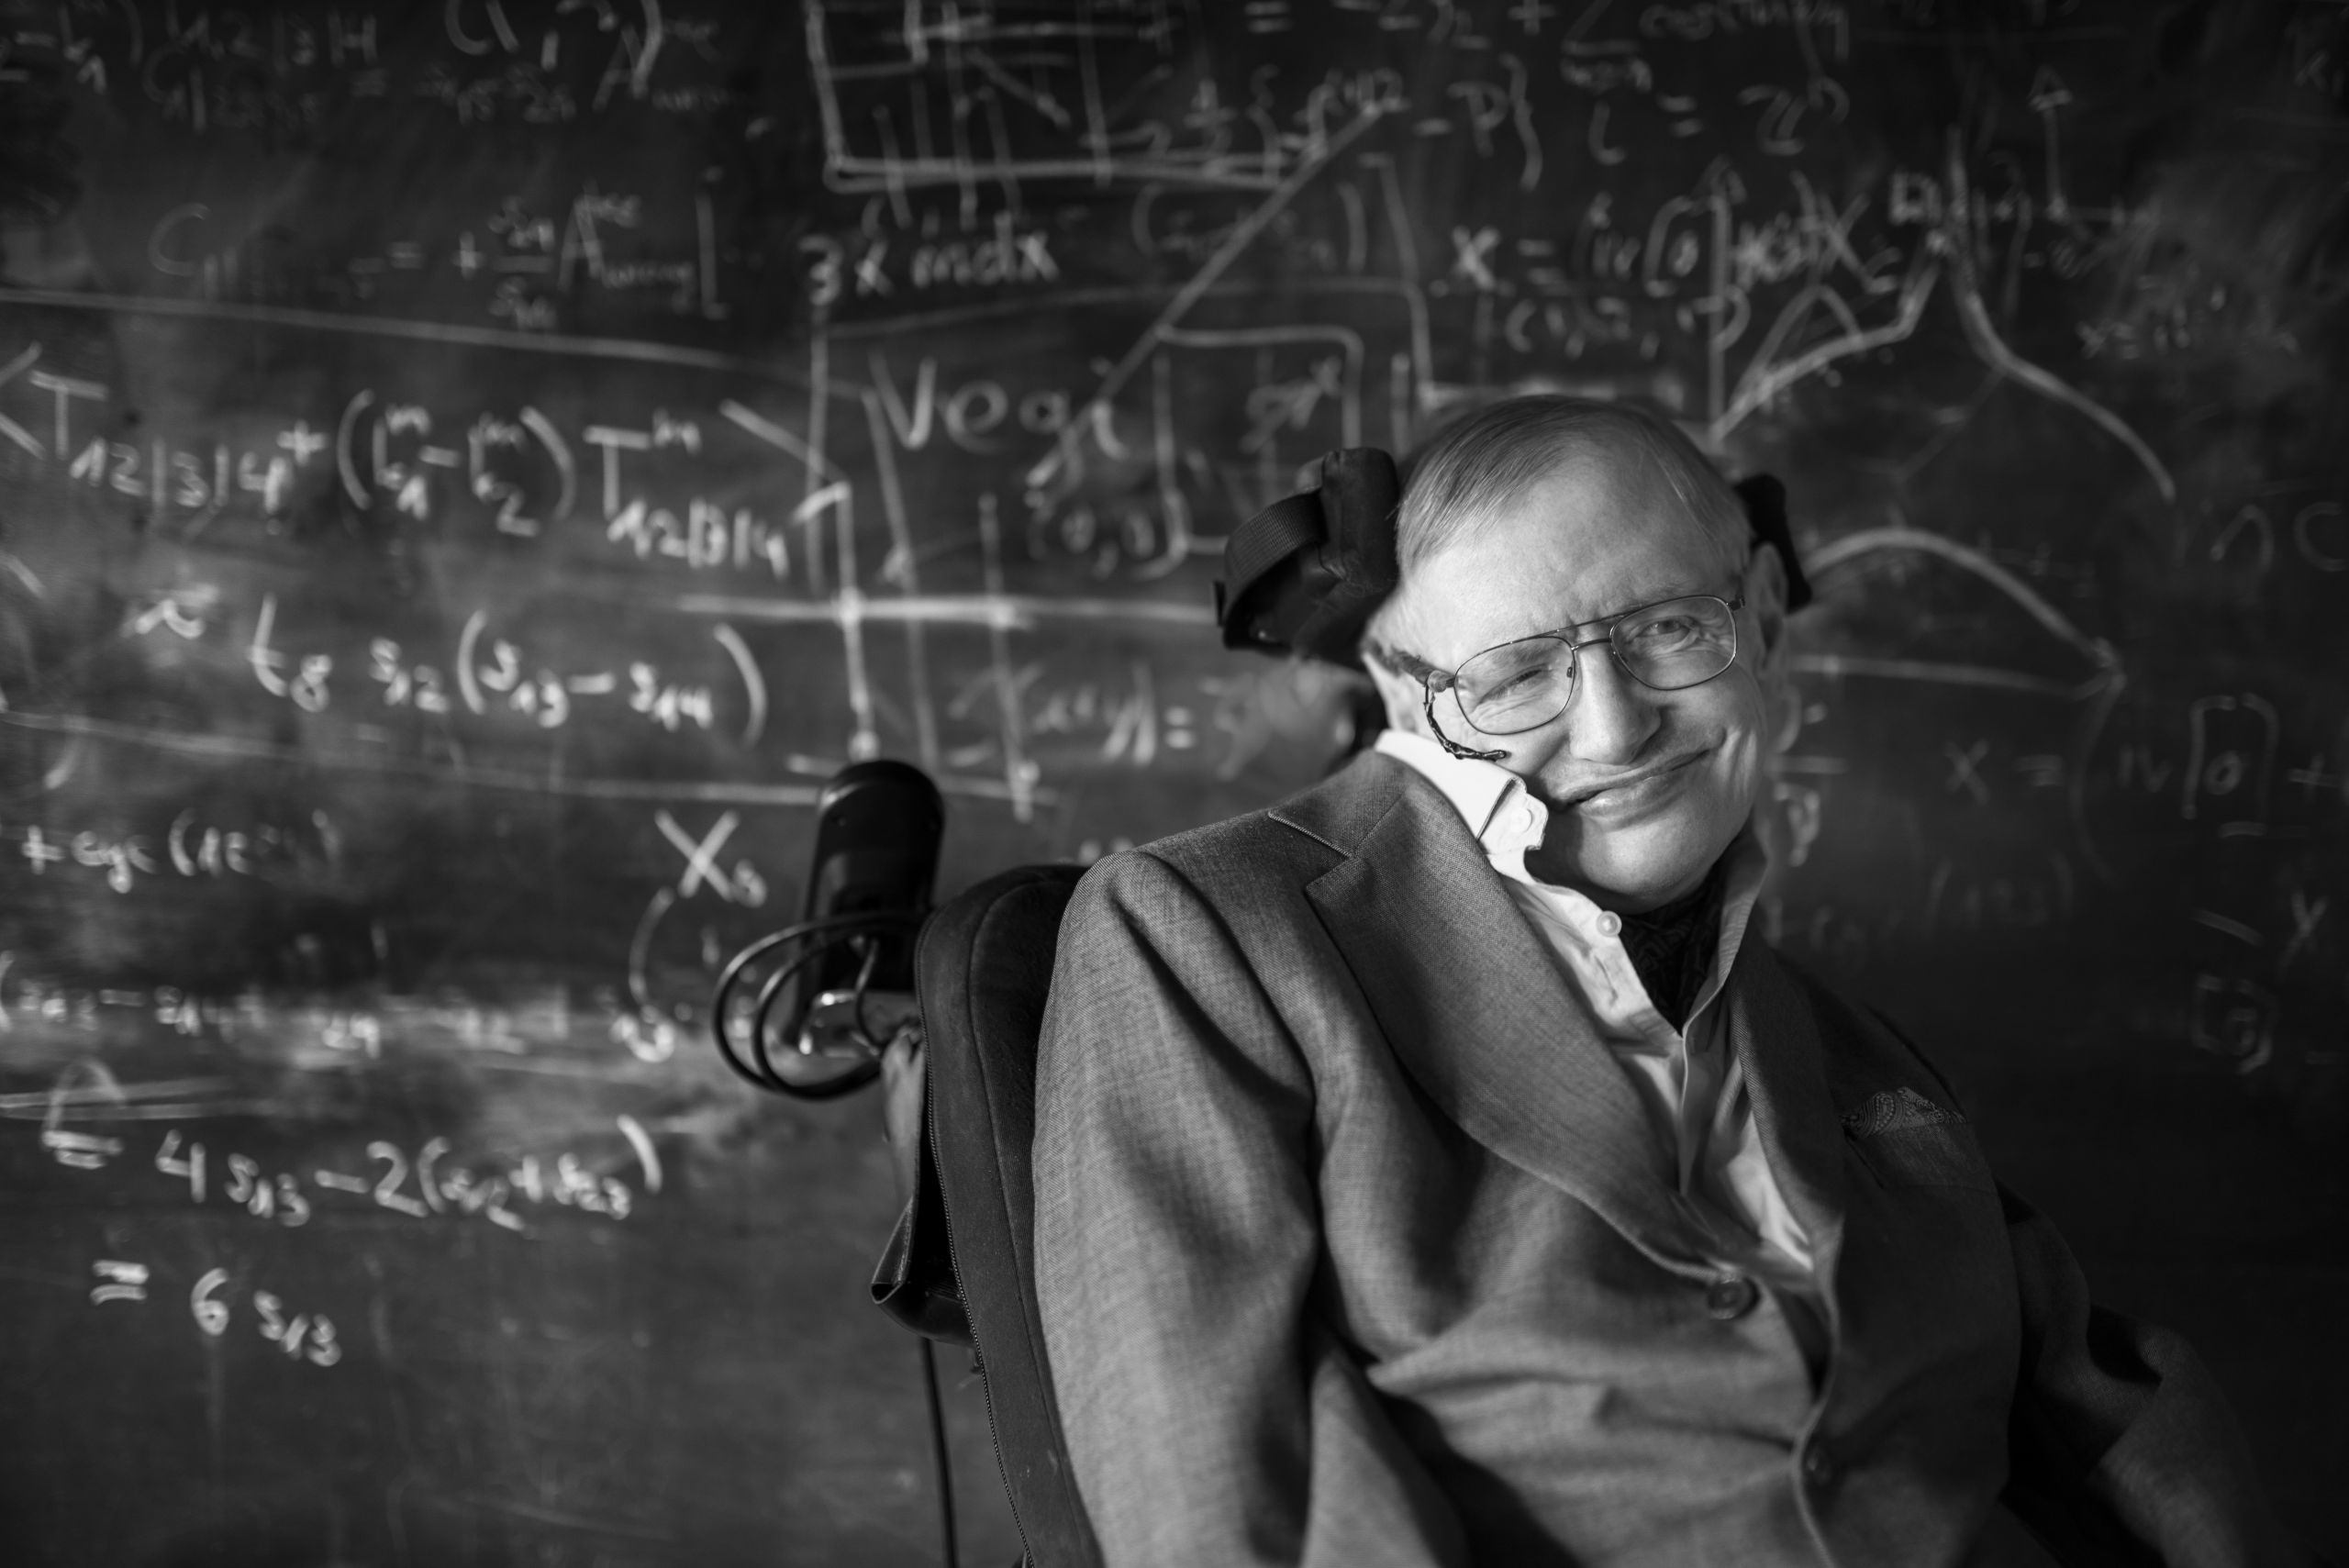 STEPHEN HAWKINGs INSPIRATIONdocx  Choose one person either a  contemporary or historical figure and describe how you would have been  influenced or  Course Hero